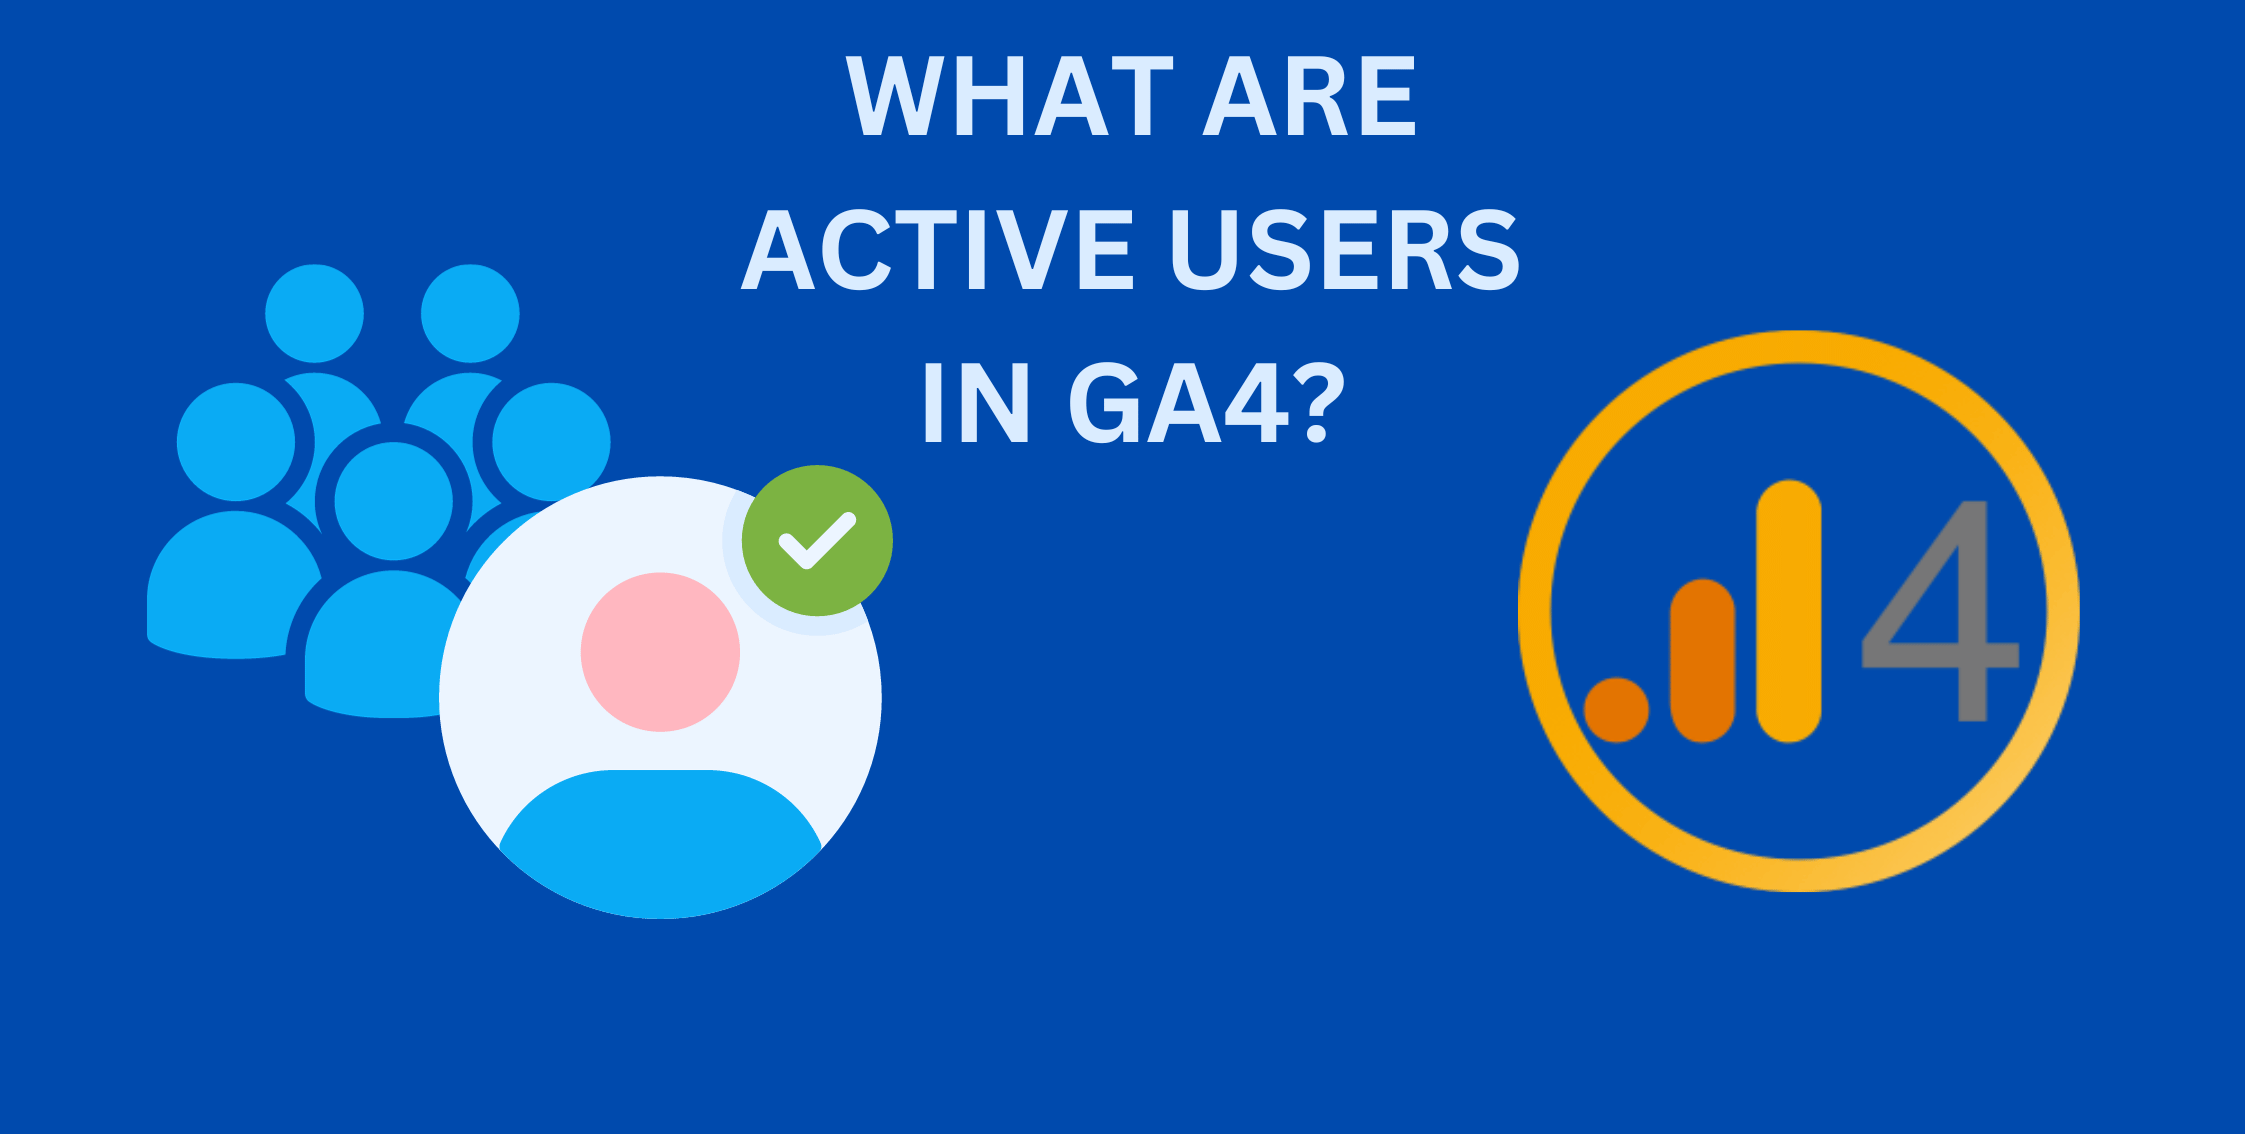 What are Active Users in GA4?